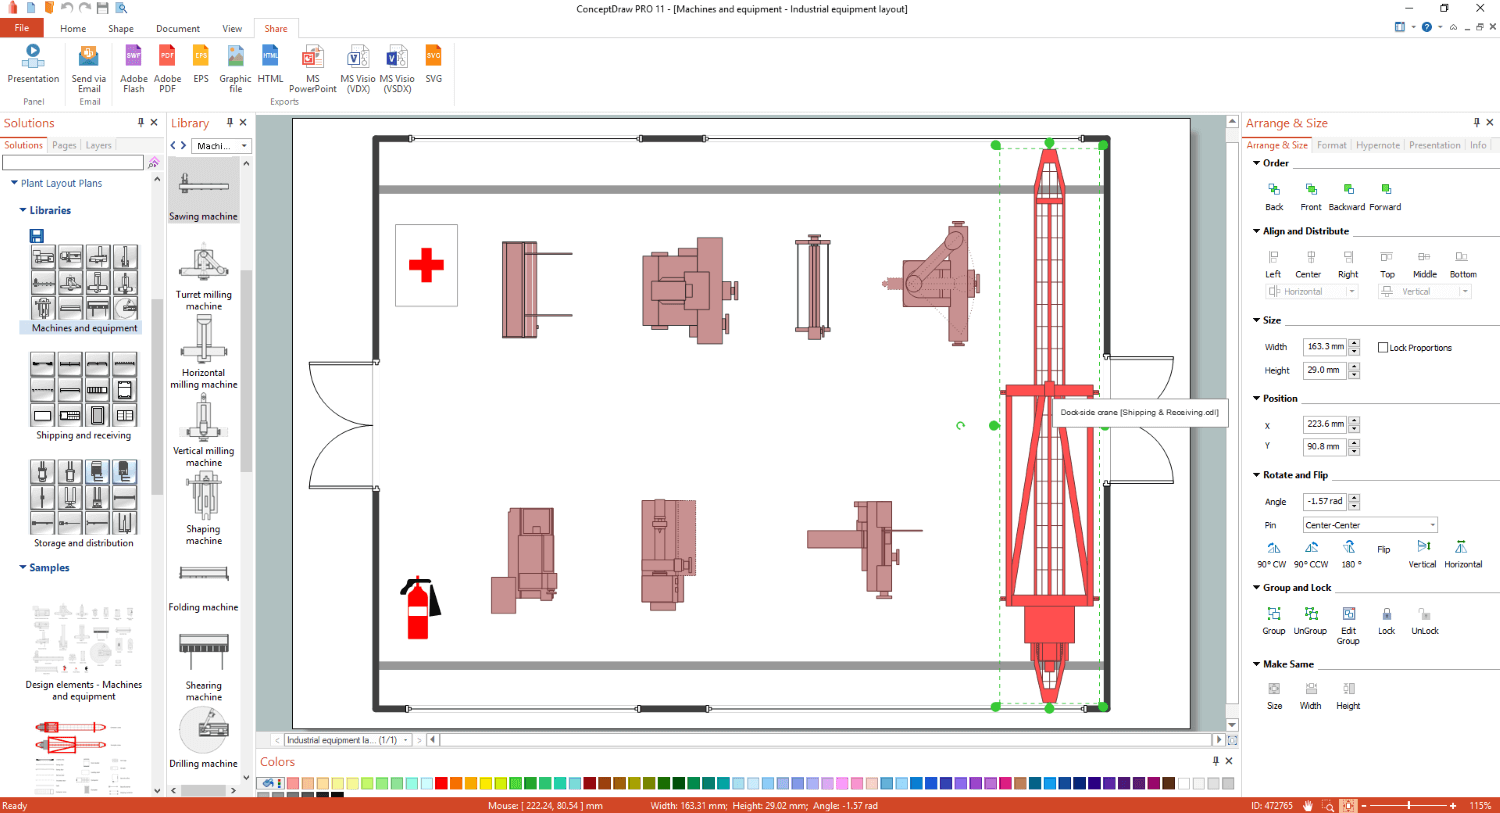 Plant Layout Plans Solution | ConceptDraw.com